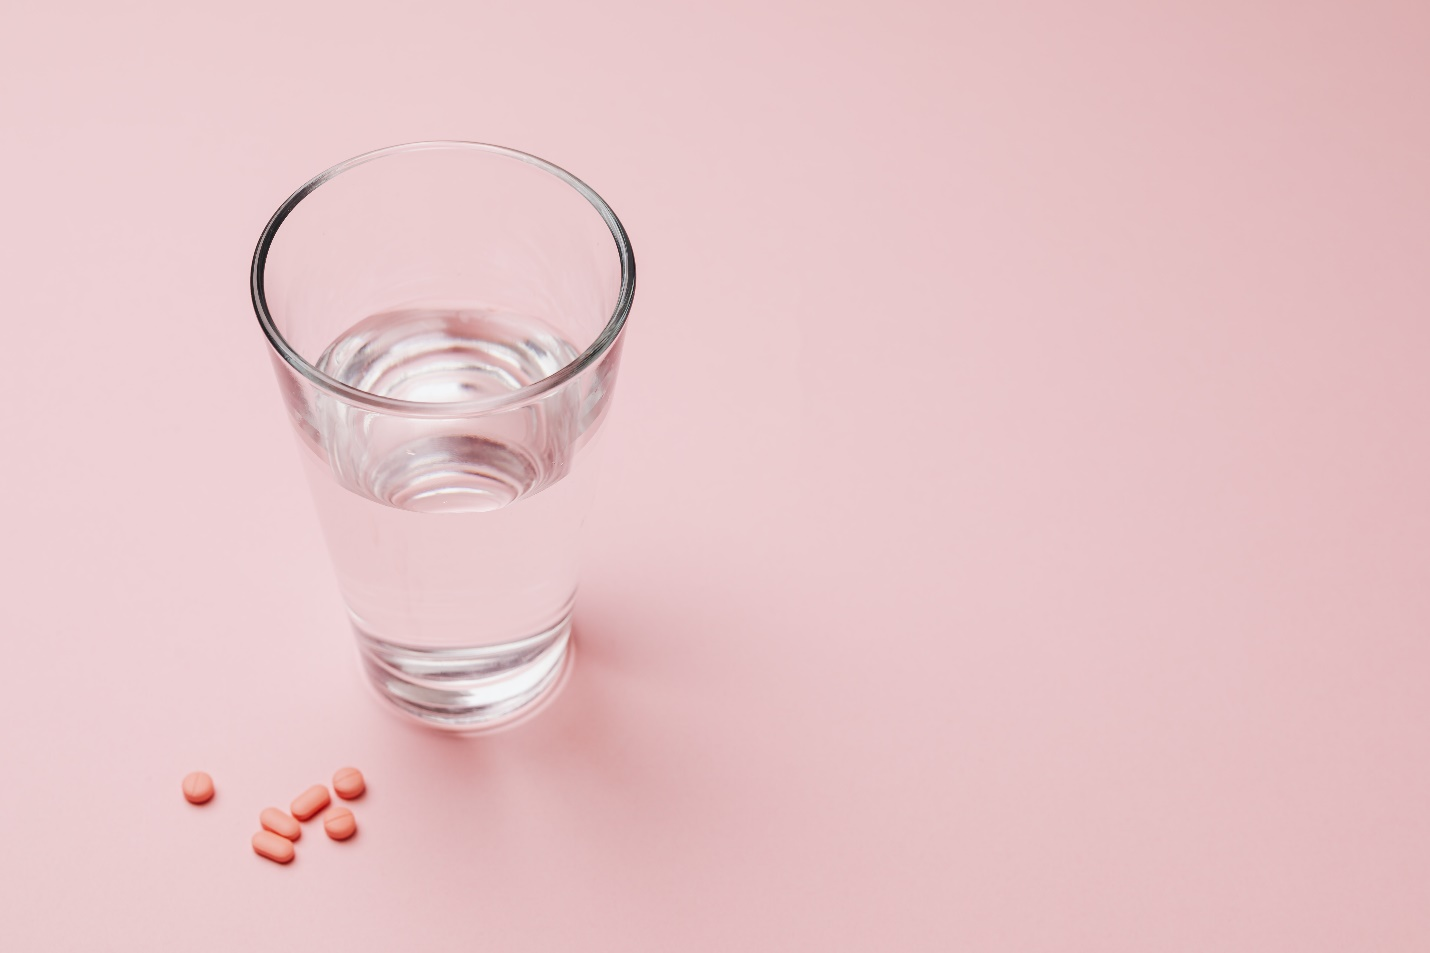 allergy medicines with a glass of water